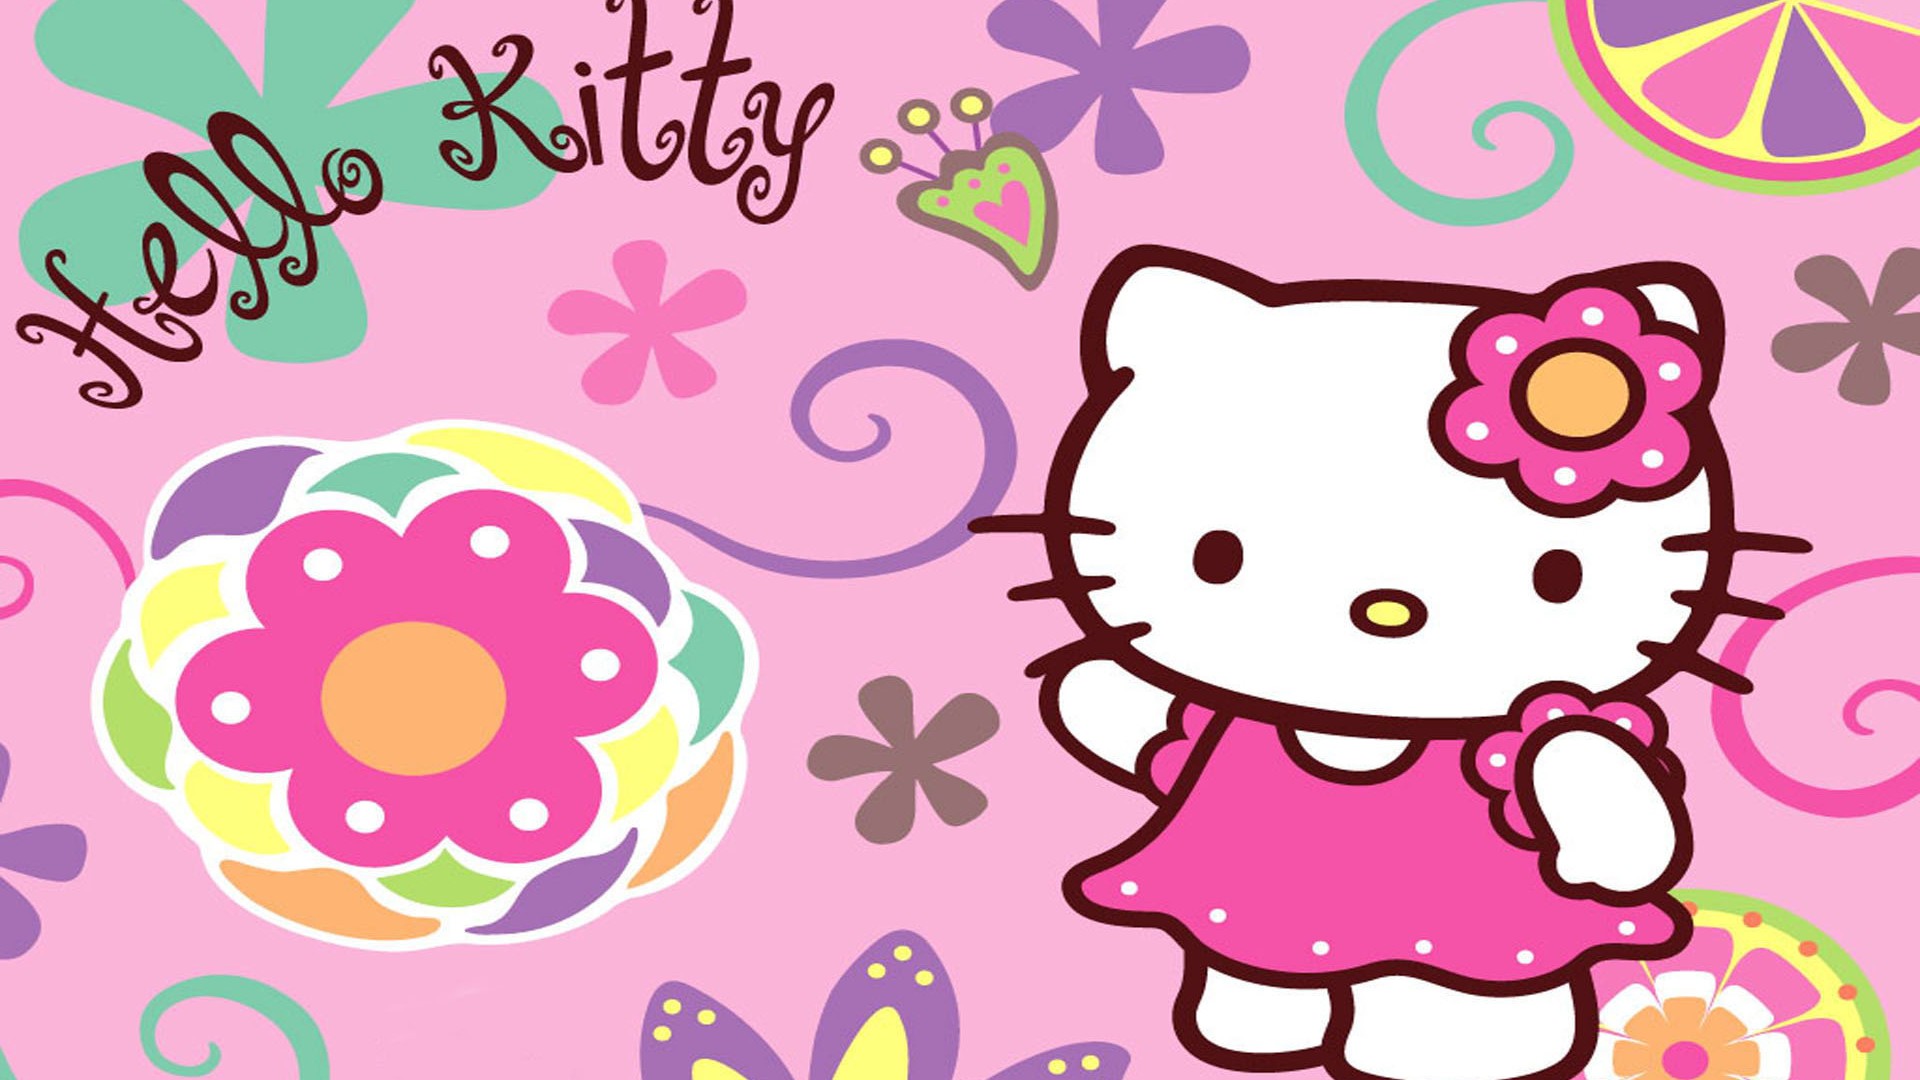 Desktop Wallpaper Hello Kitty Pictures with image resolution 1920x1080 pixel. You can use this wallpaper as background for your desktop Computer Screensavers, Android or iPhone smartphones